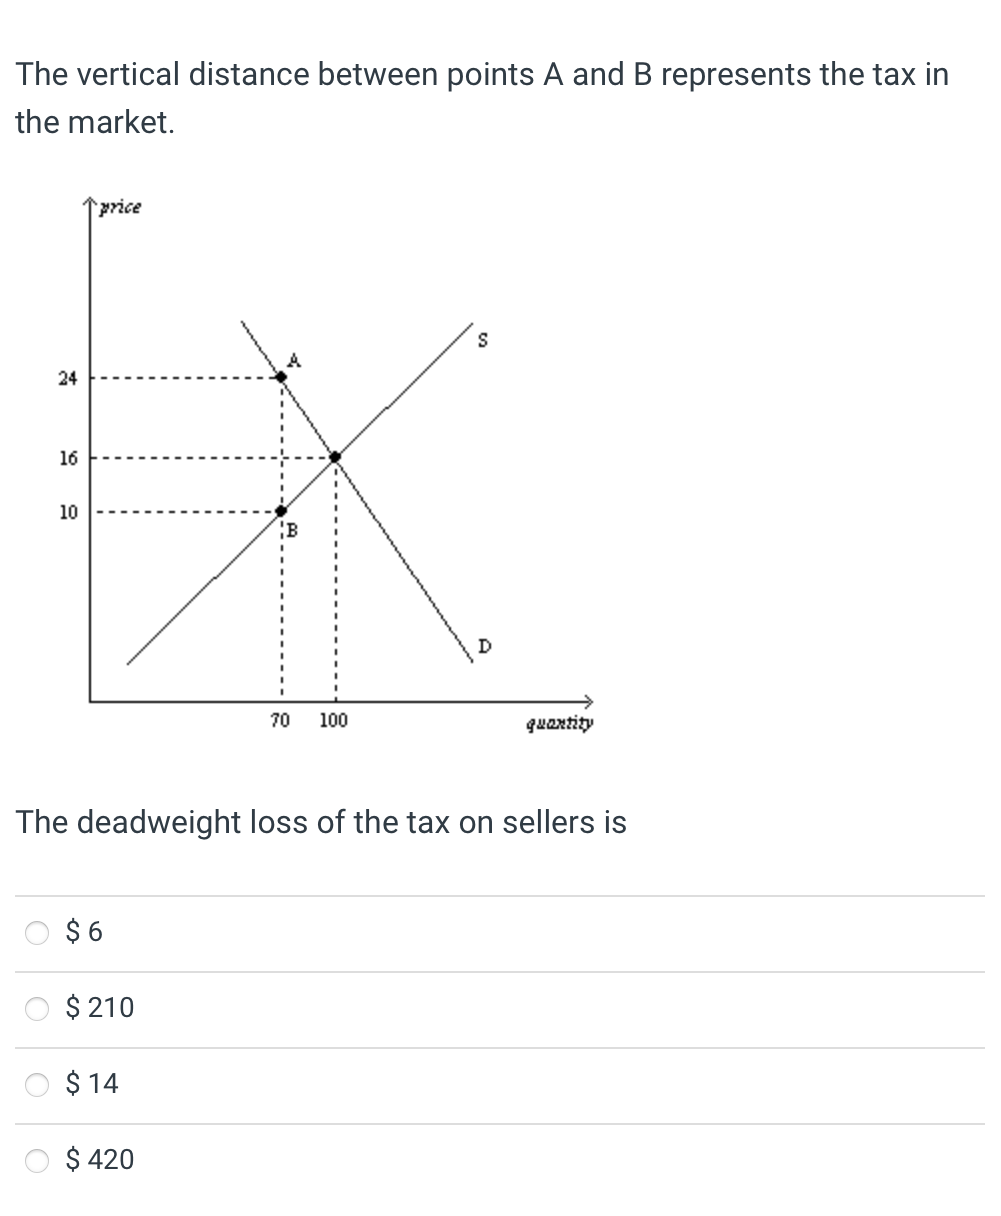 The vertical distance between points A and B represents the tax in
the market.
24
16
10
price
$ 6
$ 210
$ 14
B
The deadweight loss of the tax on sellers is
$ 420
70 100
S
quantity